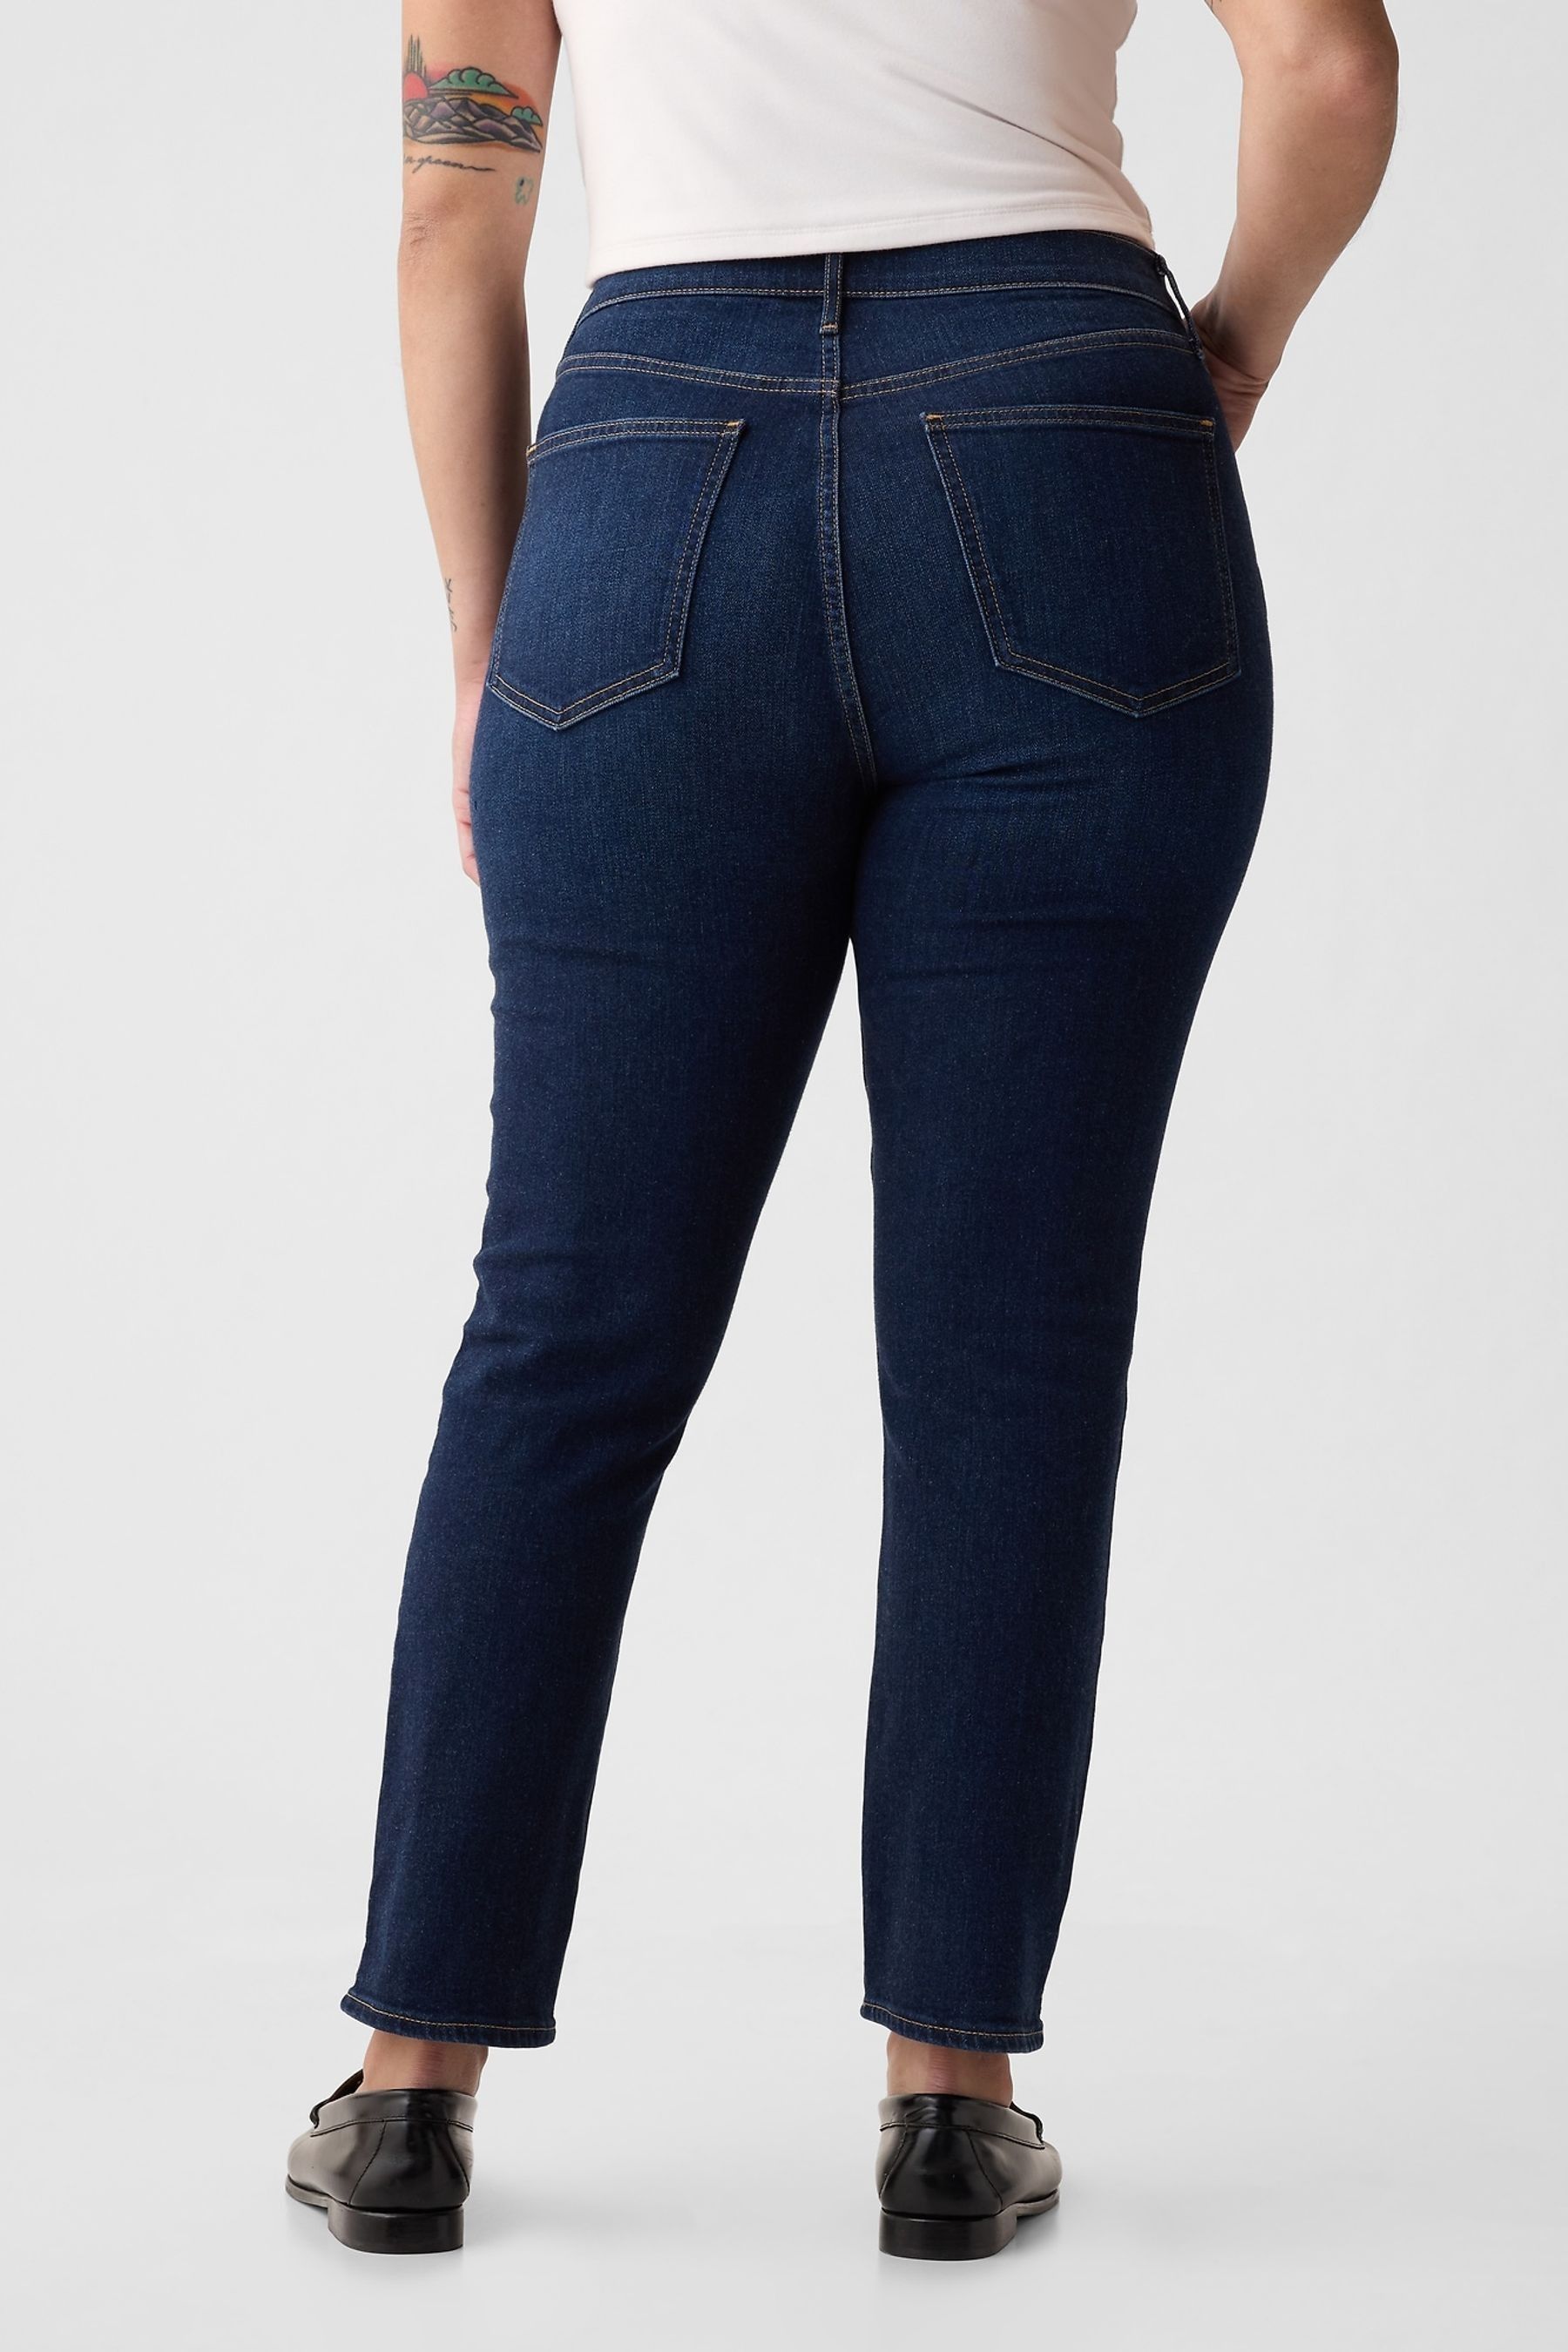 Buy Dark Wash Blue Vintage Slim Stretch High Waisted Jeans from the Gap ...